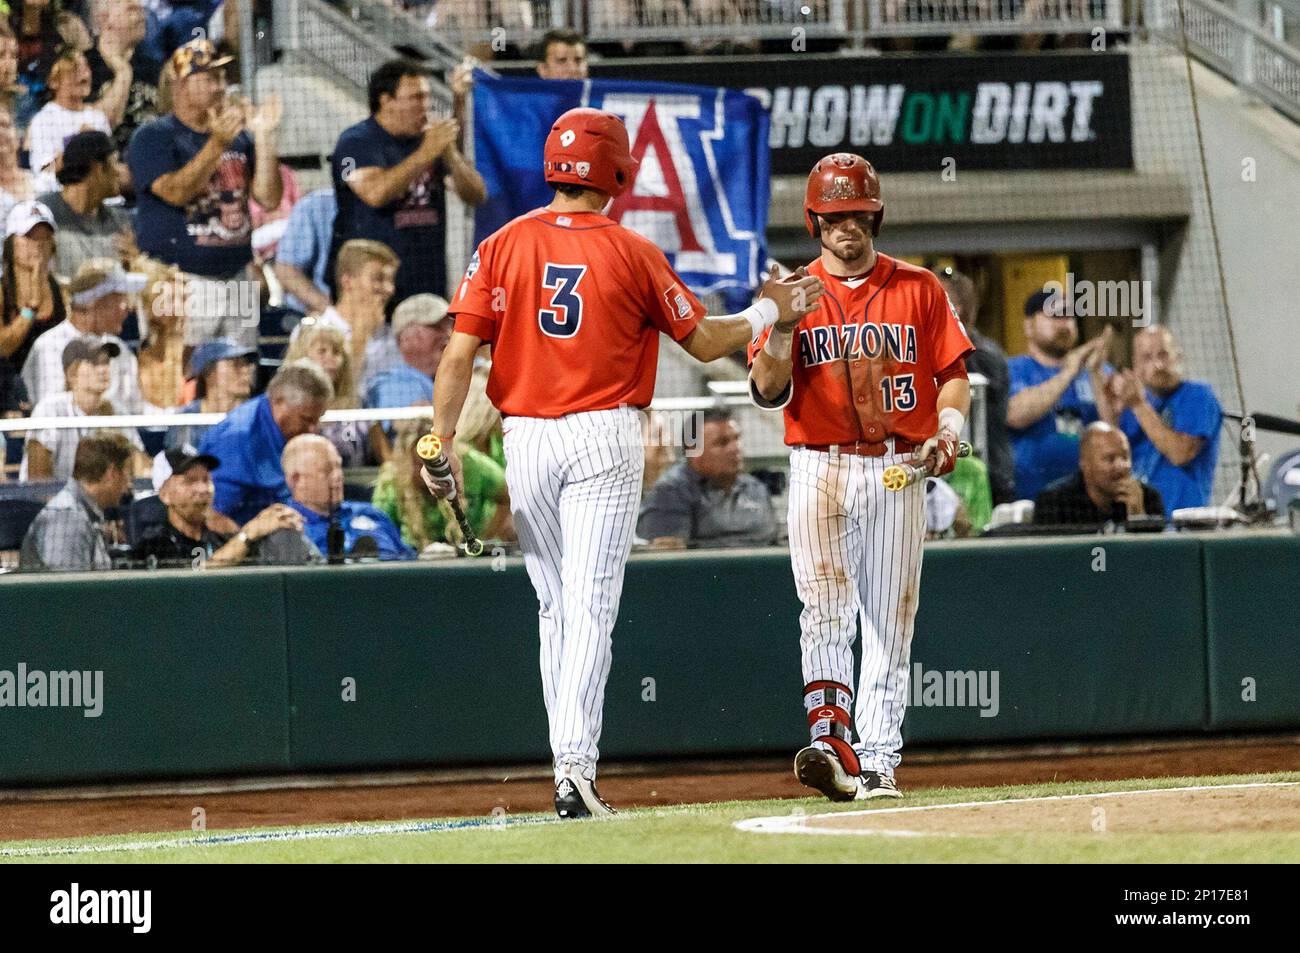 Bobby Dalbec on unlikely College World Series spot for Arizona Wildcats